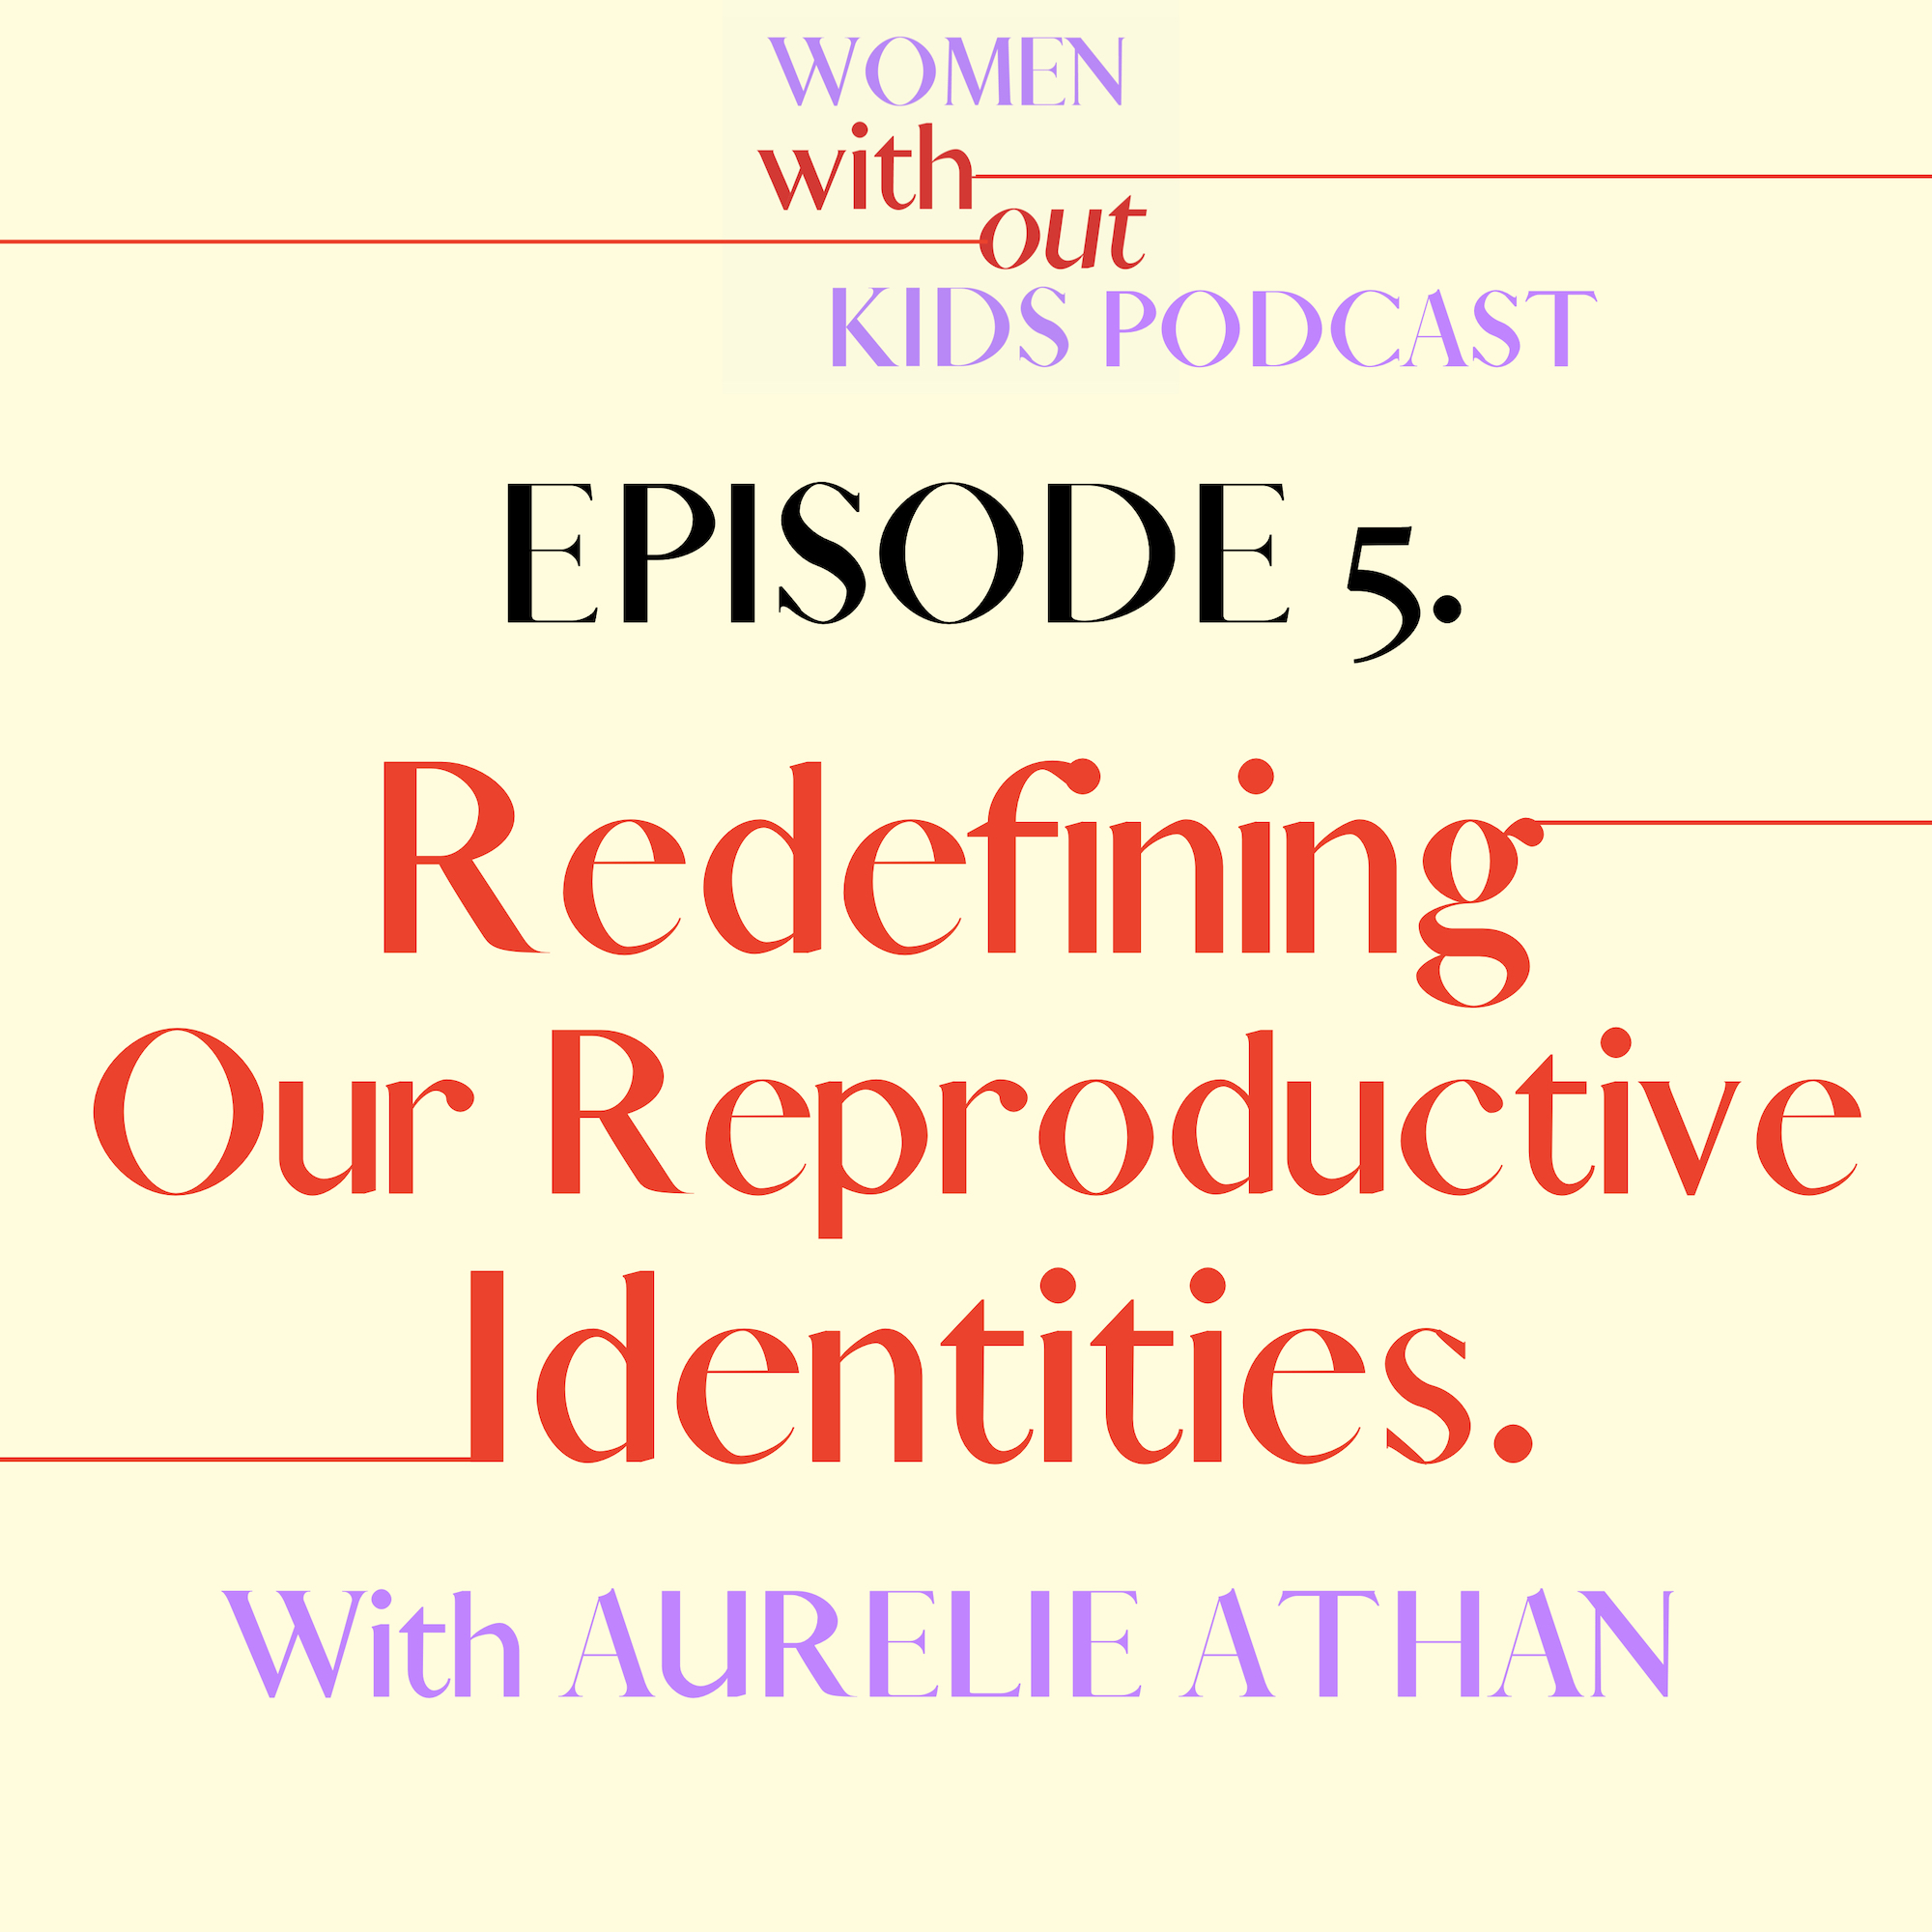 Reproductive Identity women without kids podcast Aurelie Athan